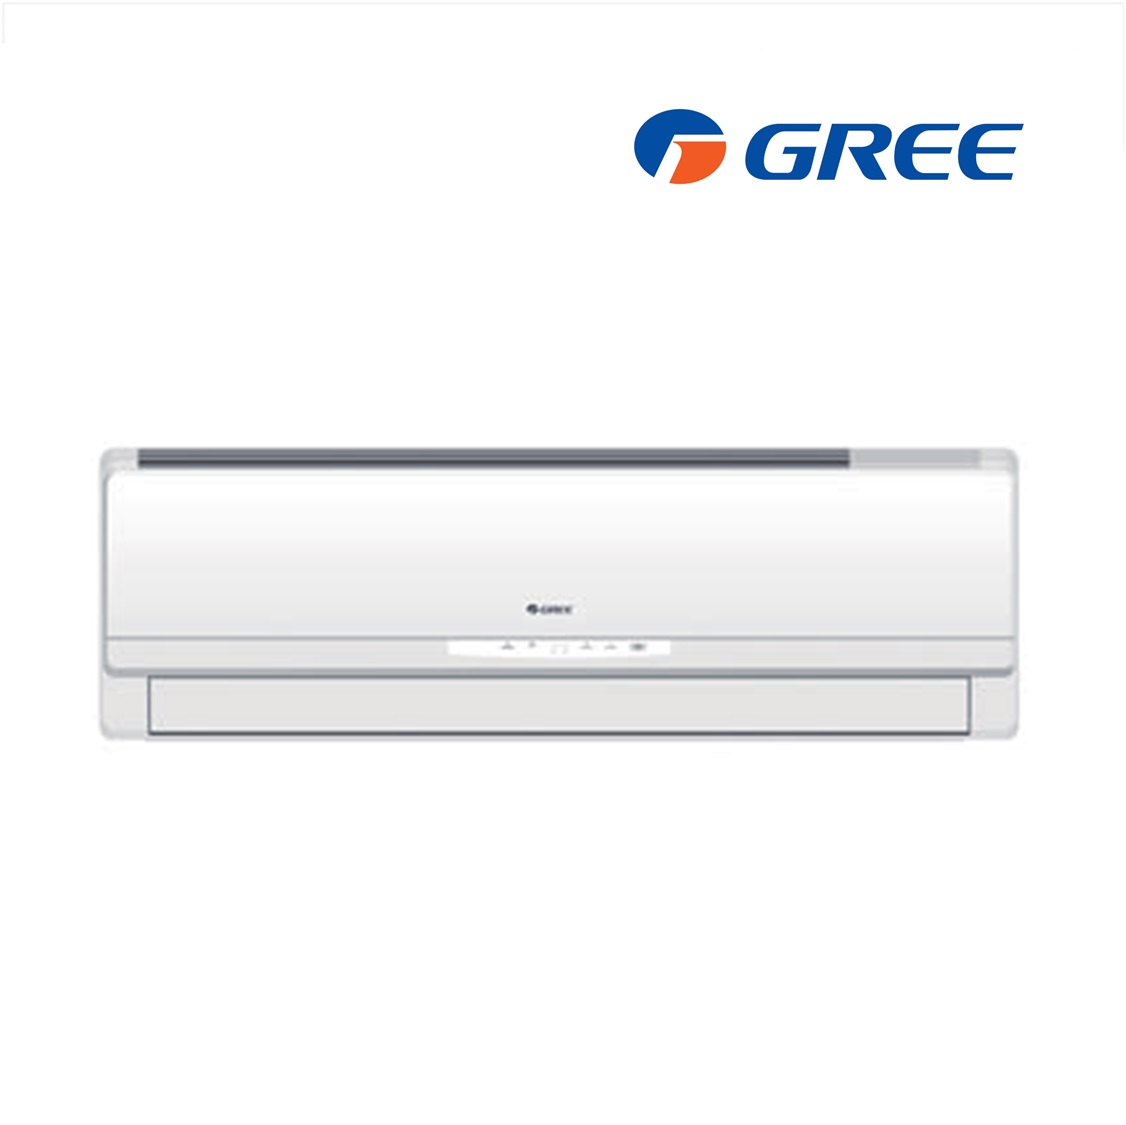 Gree 2.10kW Wall Mounted Chiller Fan Coil Unit FP-34BA2/B-D Chilled Water FCU